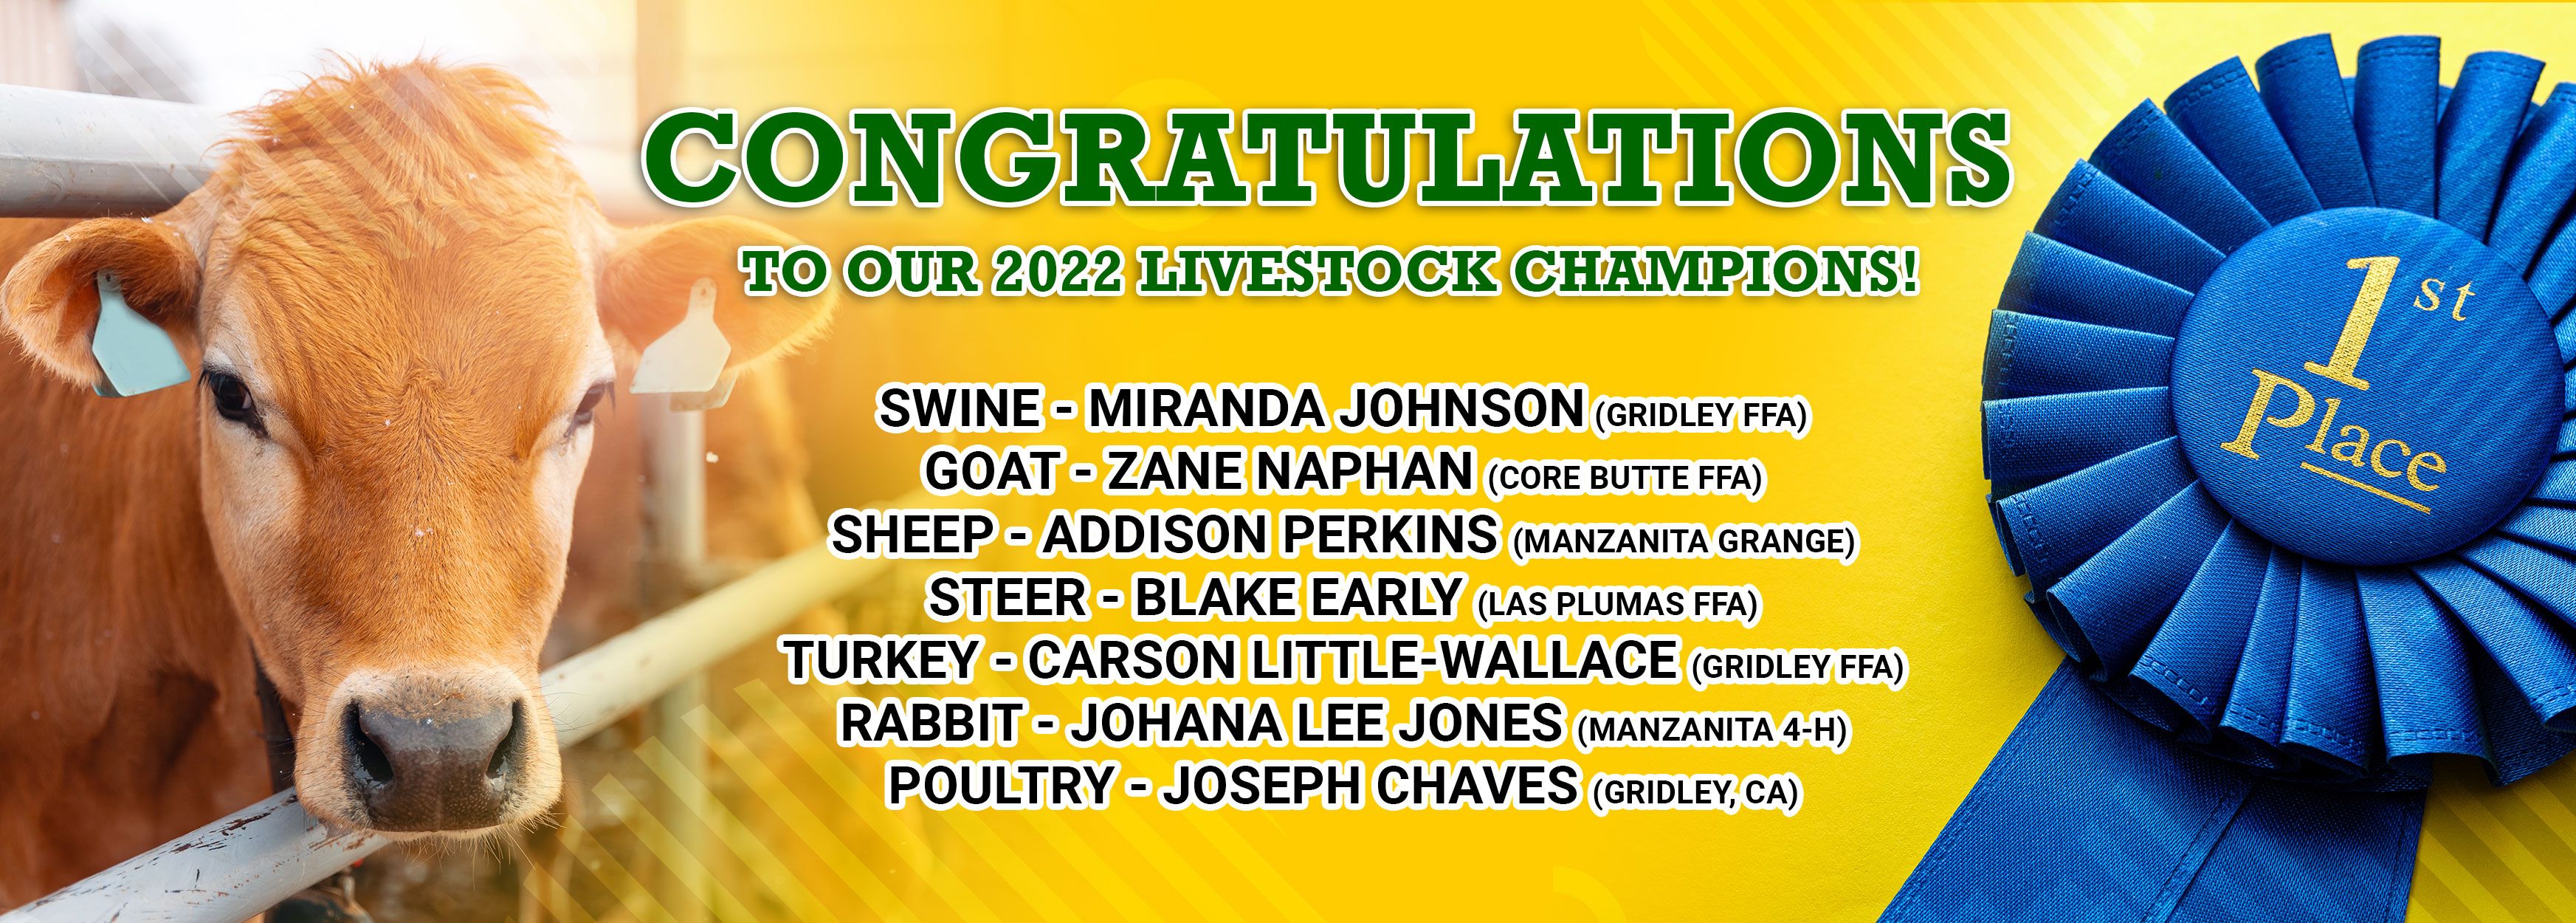 Congratulations to our 2022 Livestock Champions